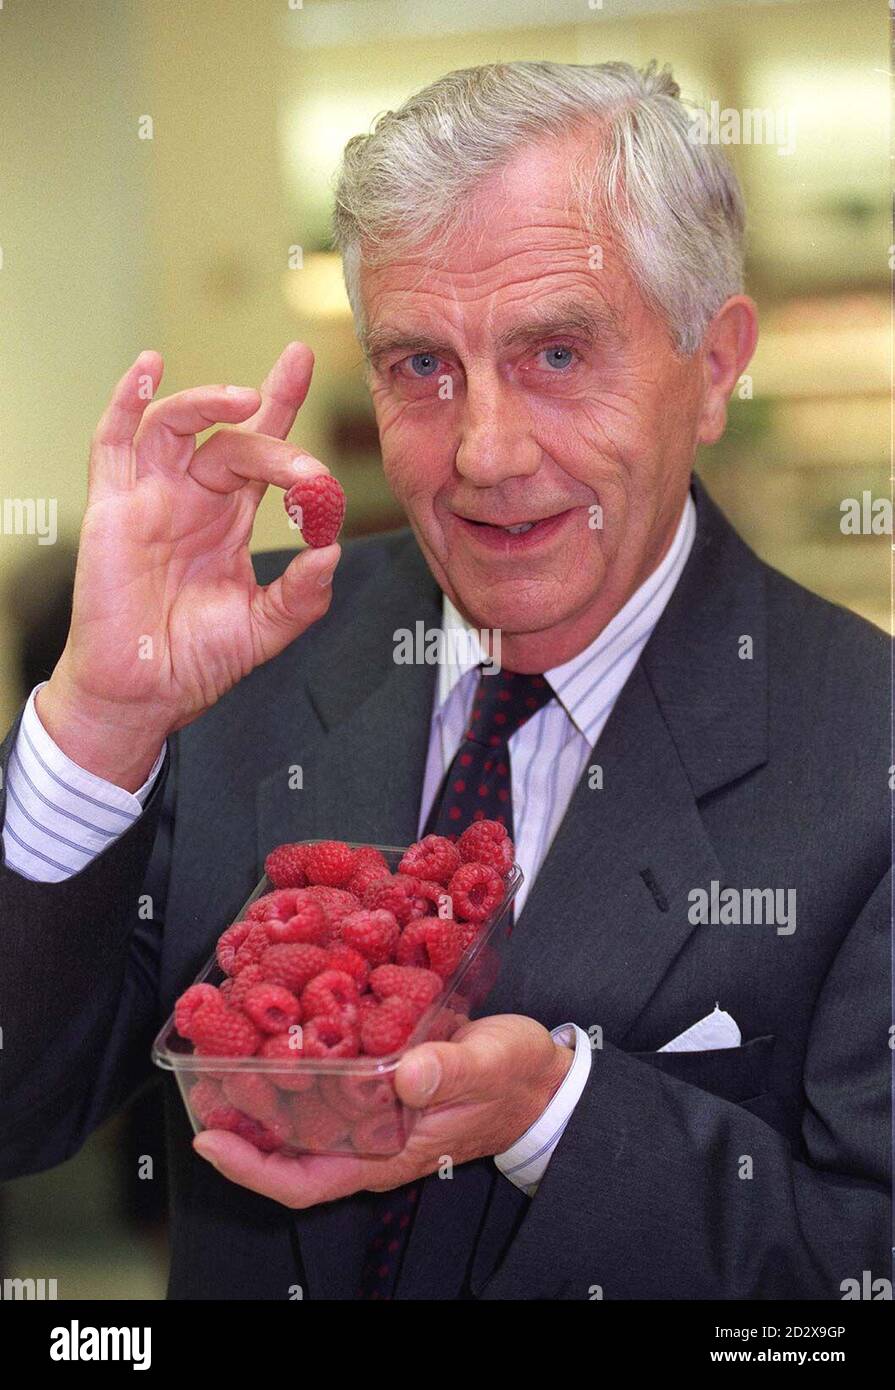 Fruit breeder Derek Jennings, with the new giant raspberry, which he has named after his grandaughter, Terri-Louise. The raspberry, which was launched by food giant Marks & Spencer today (Friday), was described as 'succulent, highly flavoured and on average double the size of any of its rivals'. Photo by Michael Crabtree/PA Stock Photo